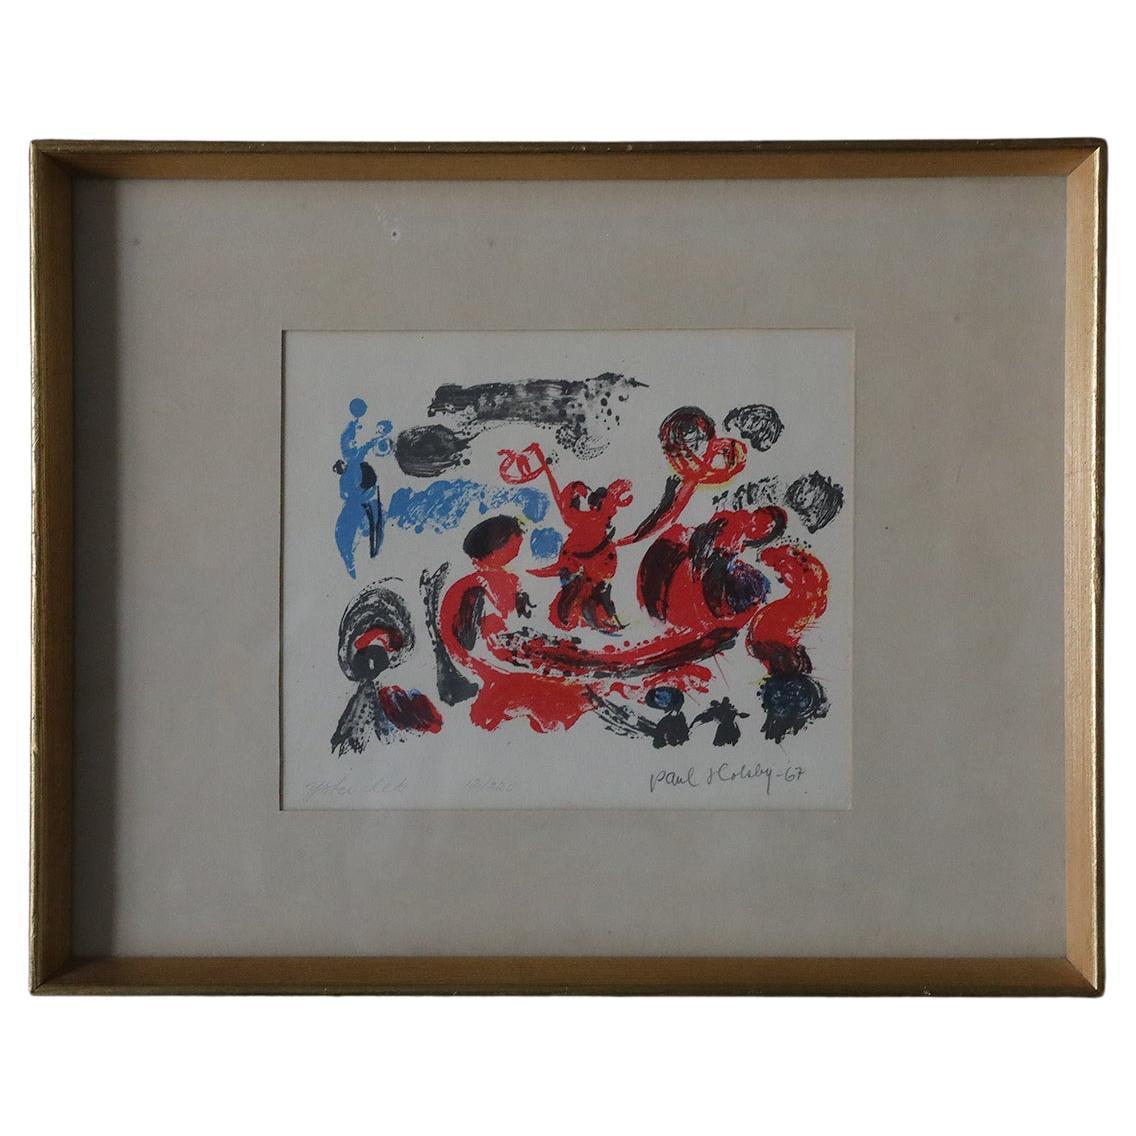 Paul Holsby, Yster lek, Color Lithograph, 1967, Framed For Sale